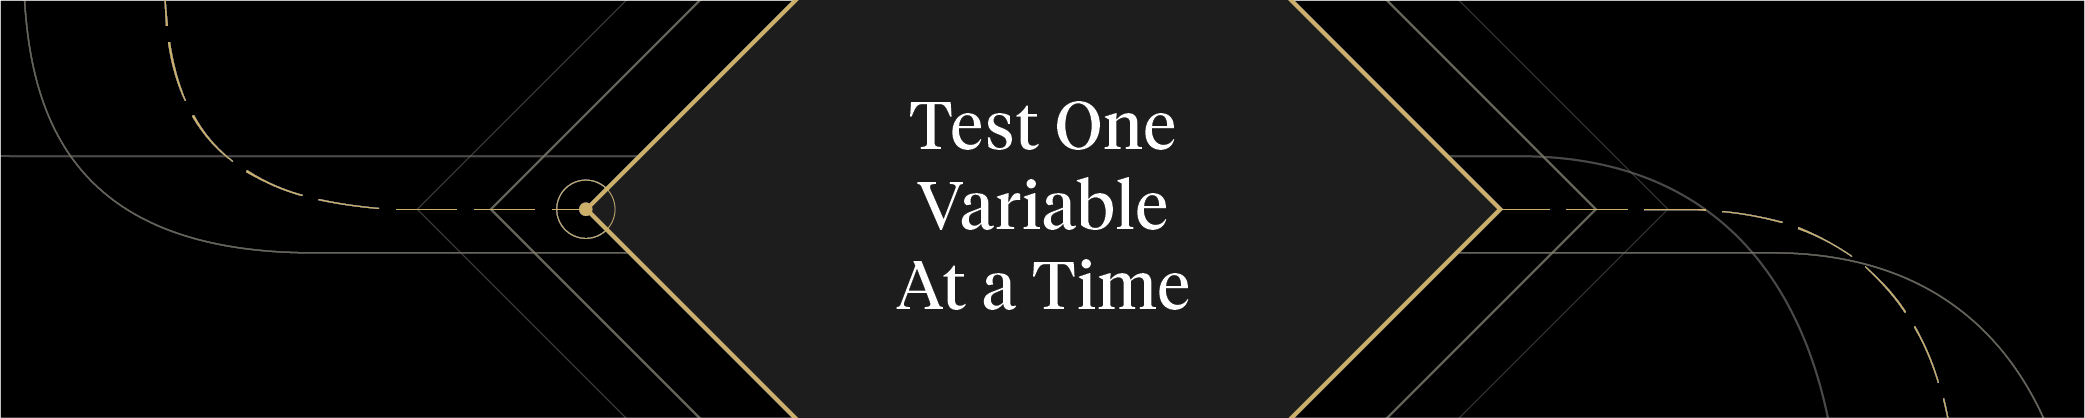 Test One Variable At a Time